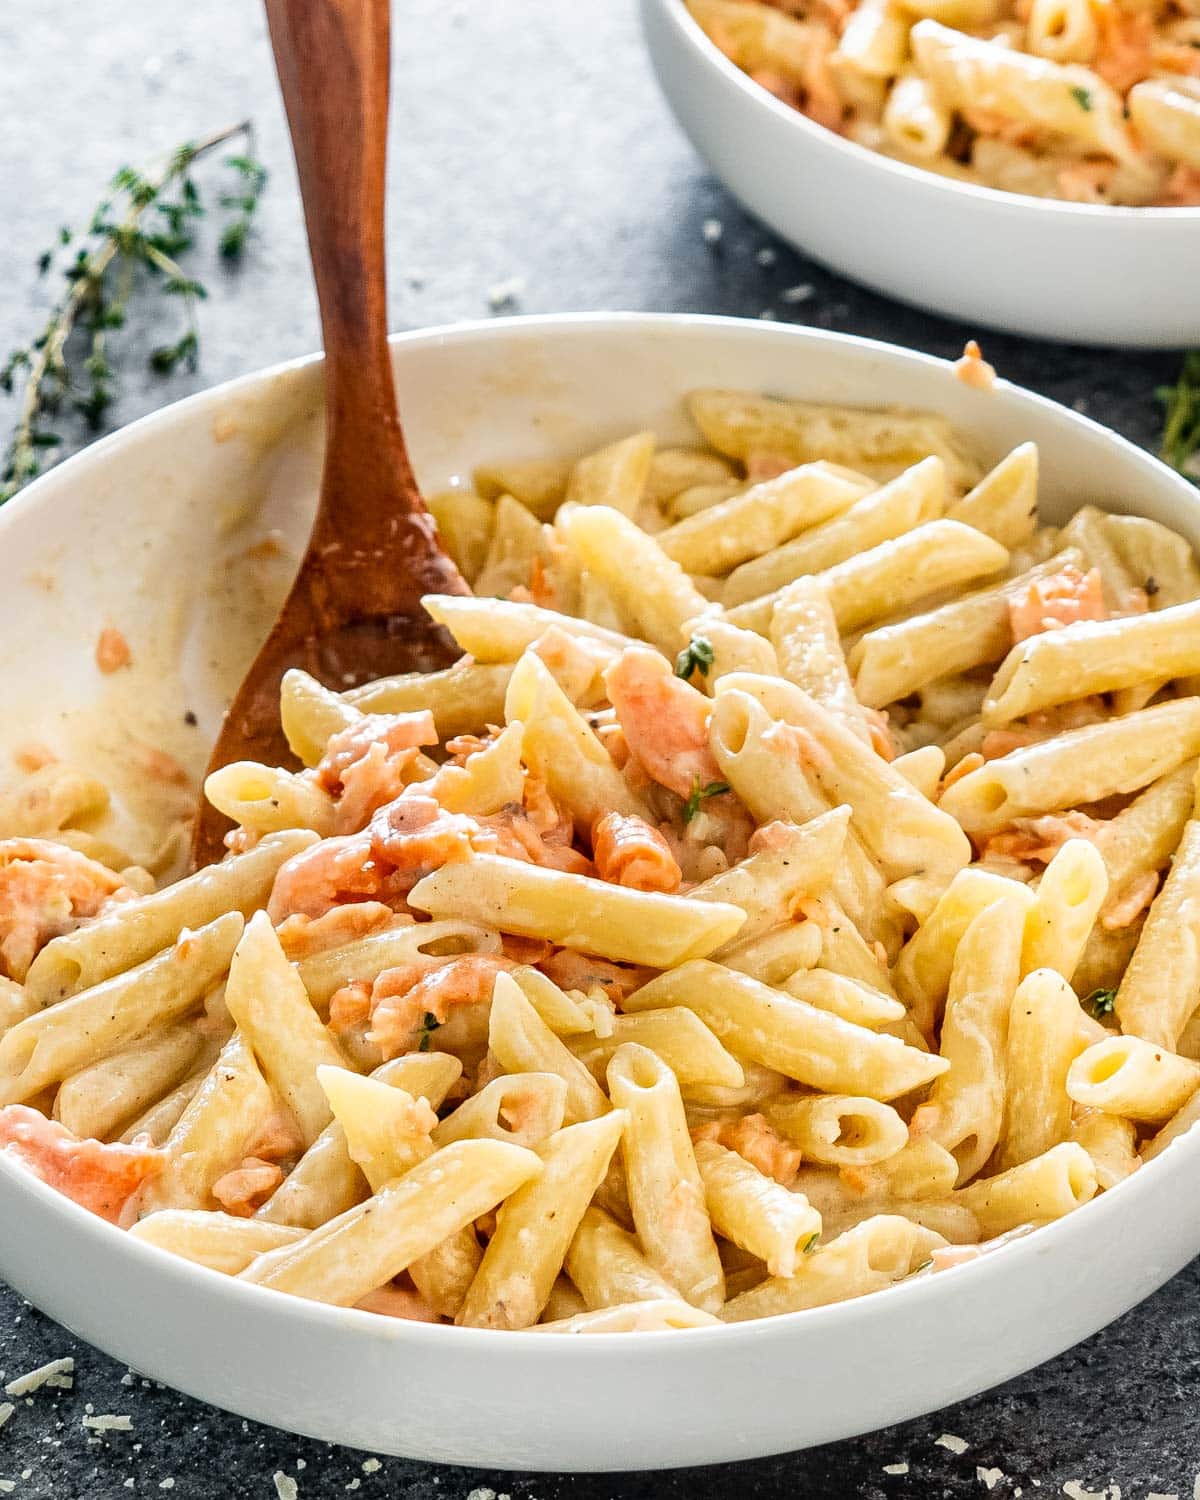 alfredo salmon pasta in a white bowl with a wooden spoon inside.